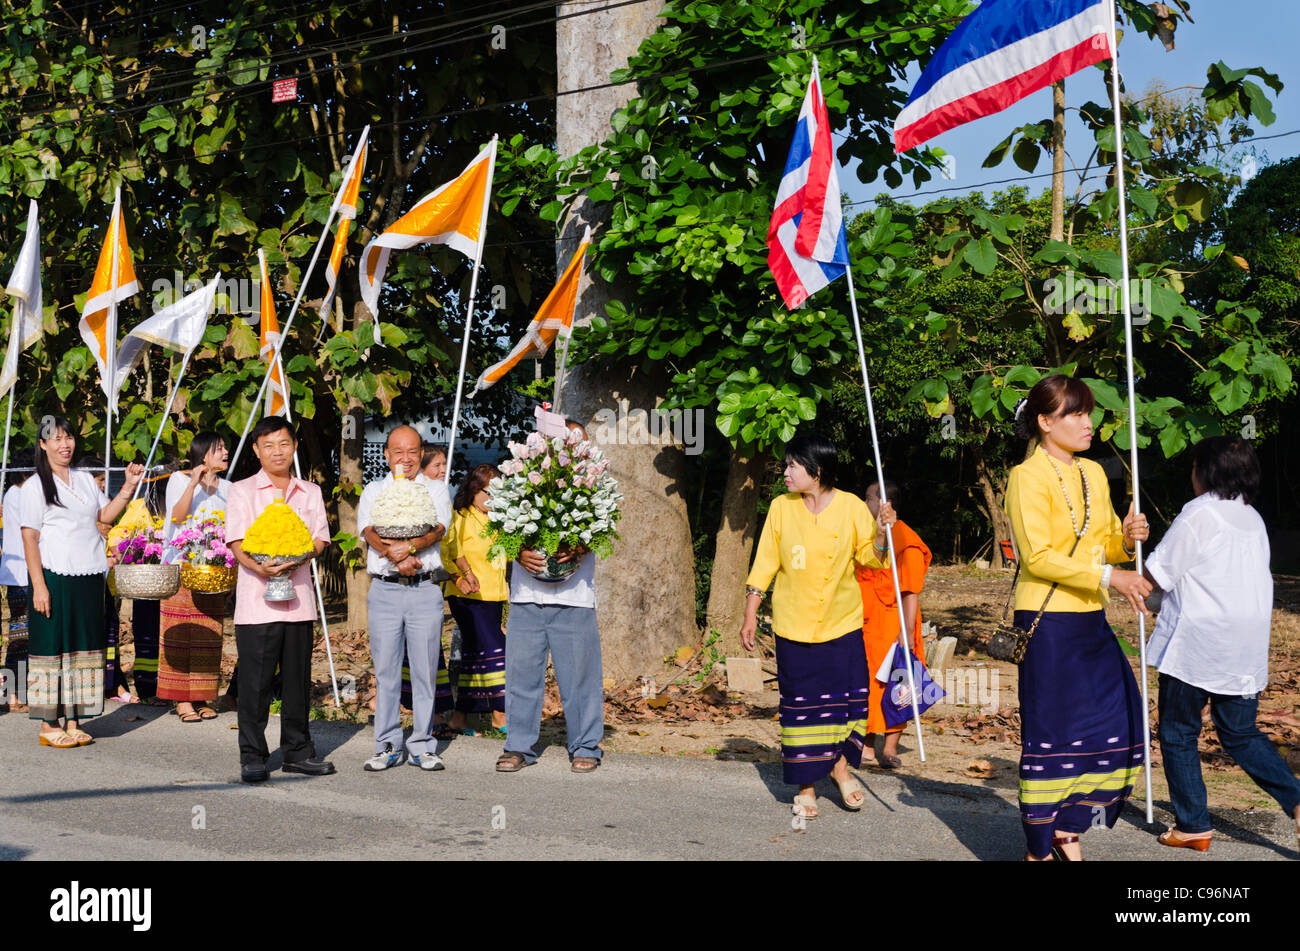 Women wearing traditional clothing carrying Thai flags and banners in ...